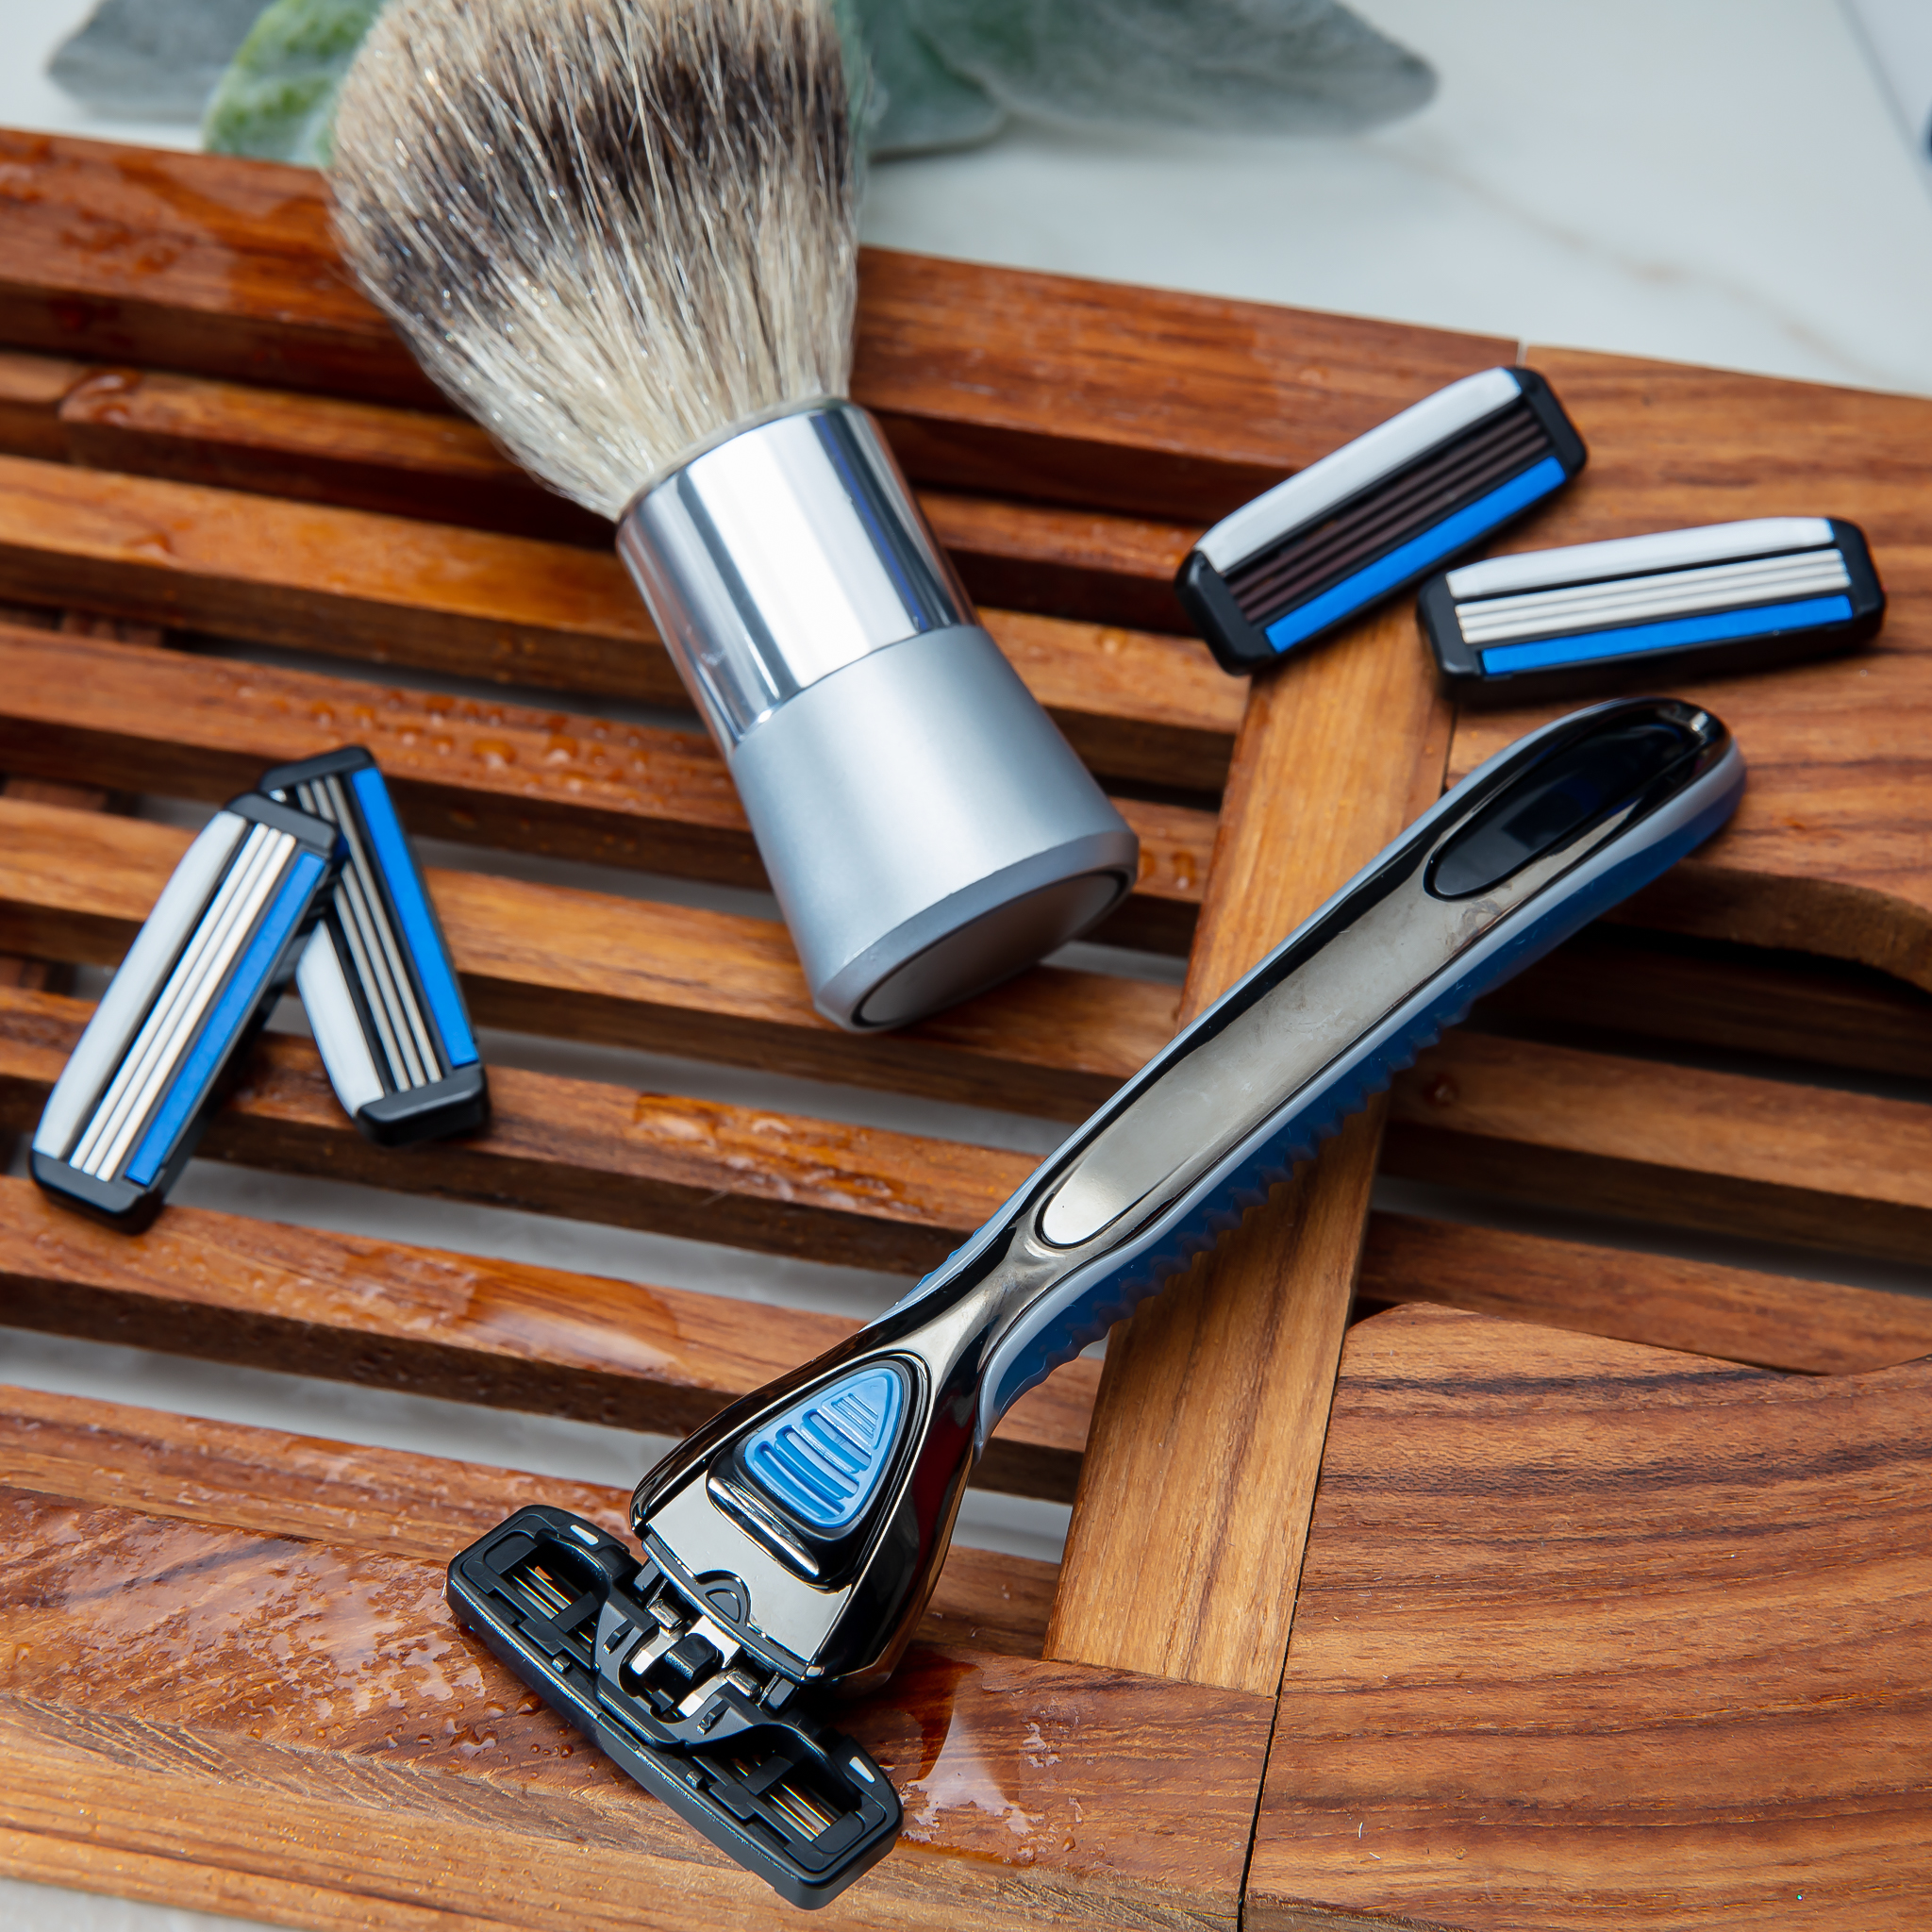 What Makes Shopping Annuity® Brand Performance Razors for Men Unique?